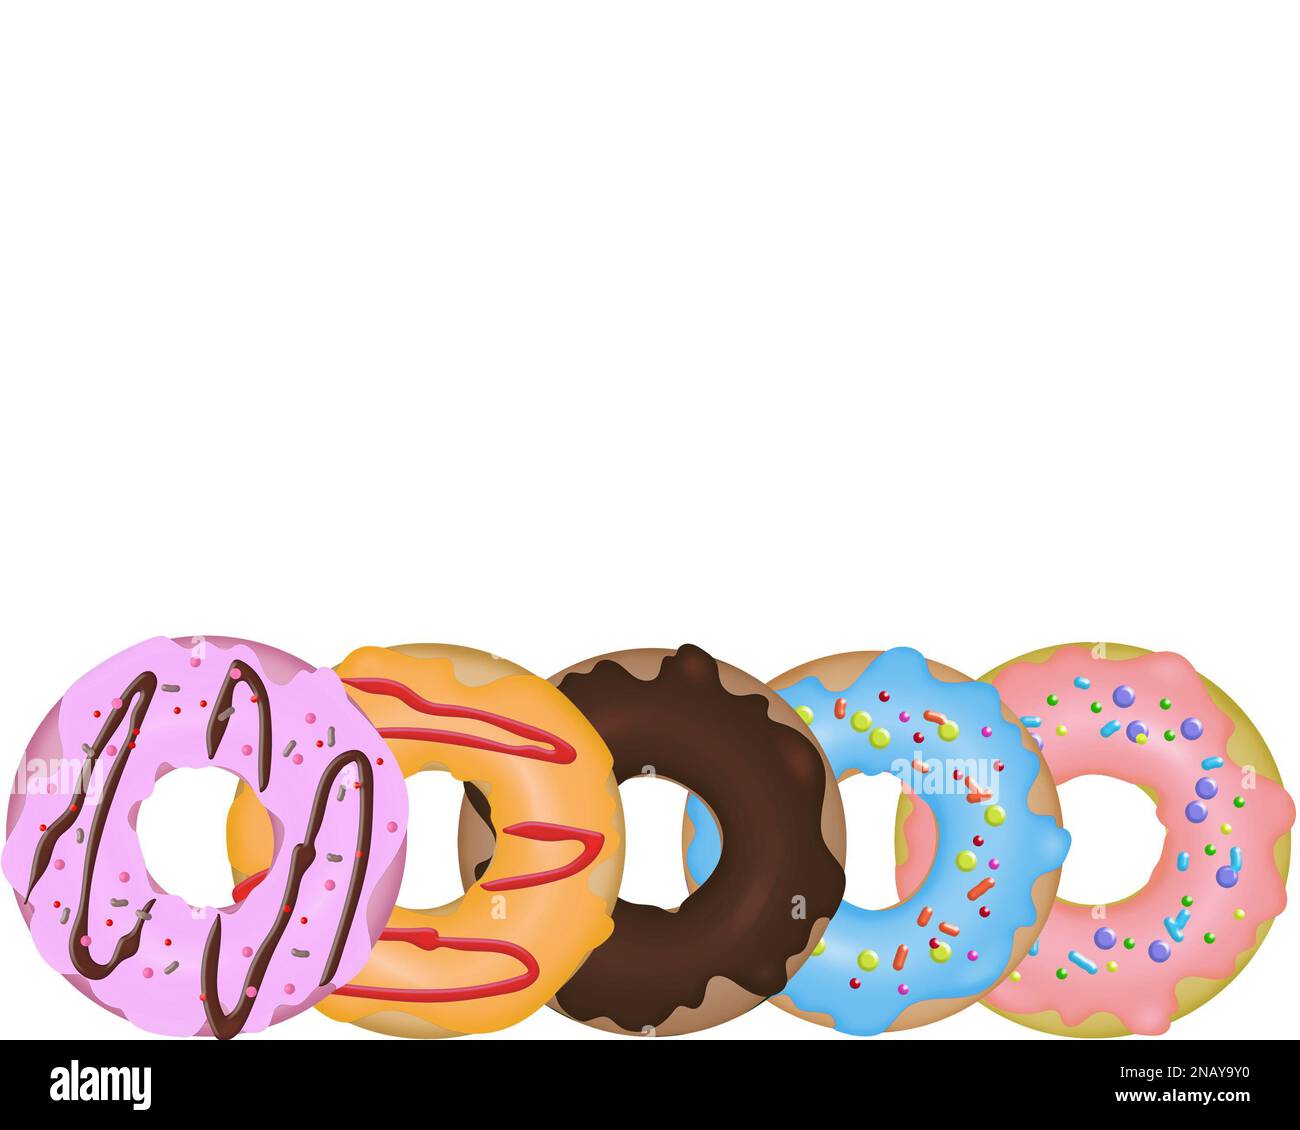 Illustrated frame or border of colorful iced donuts on a white background. Area for text. Stock Photo